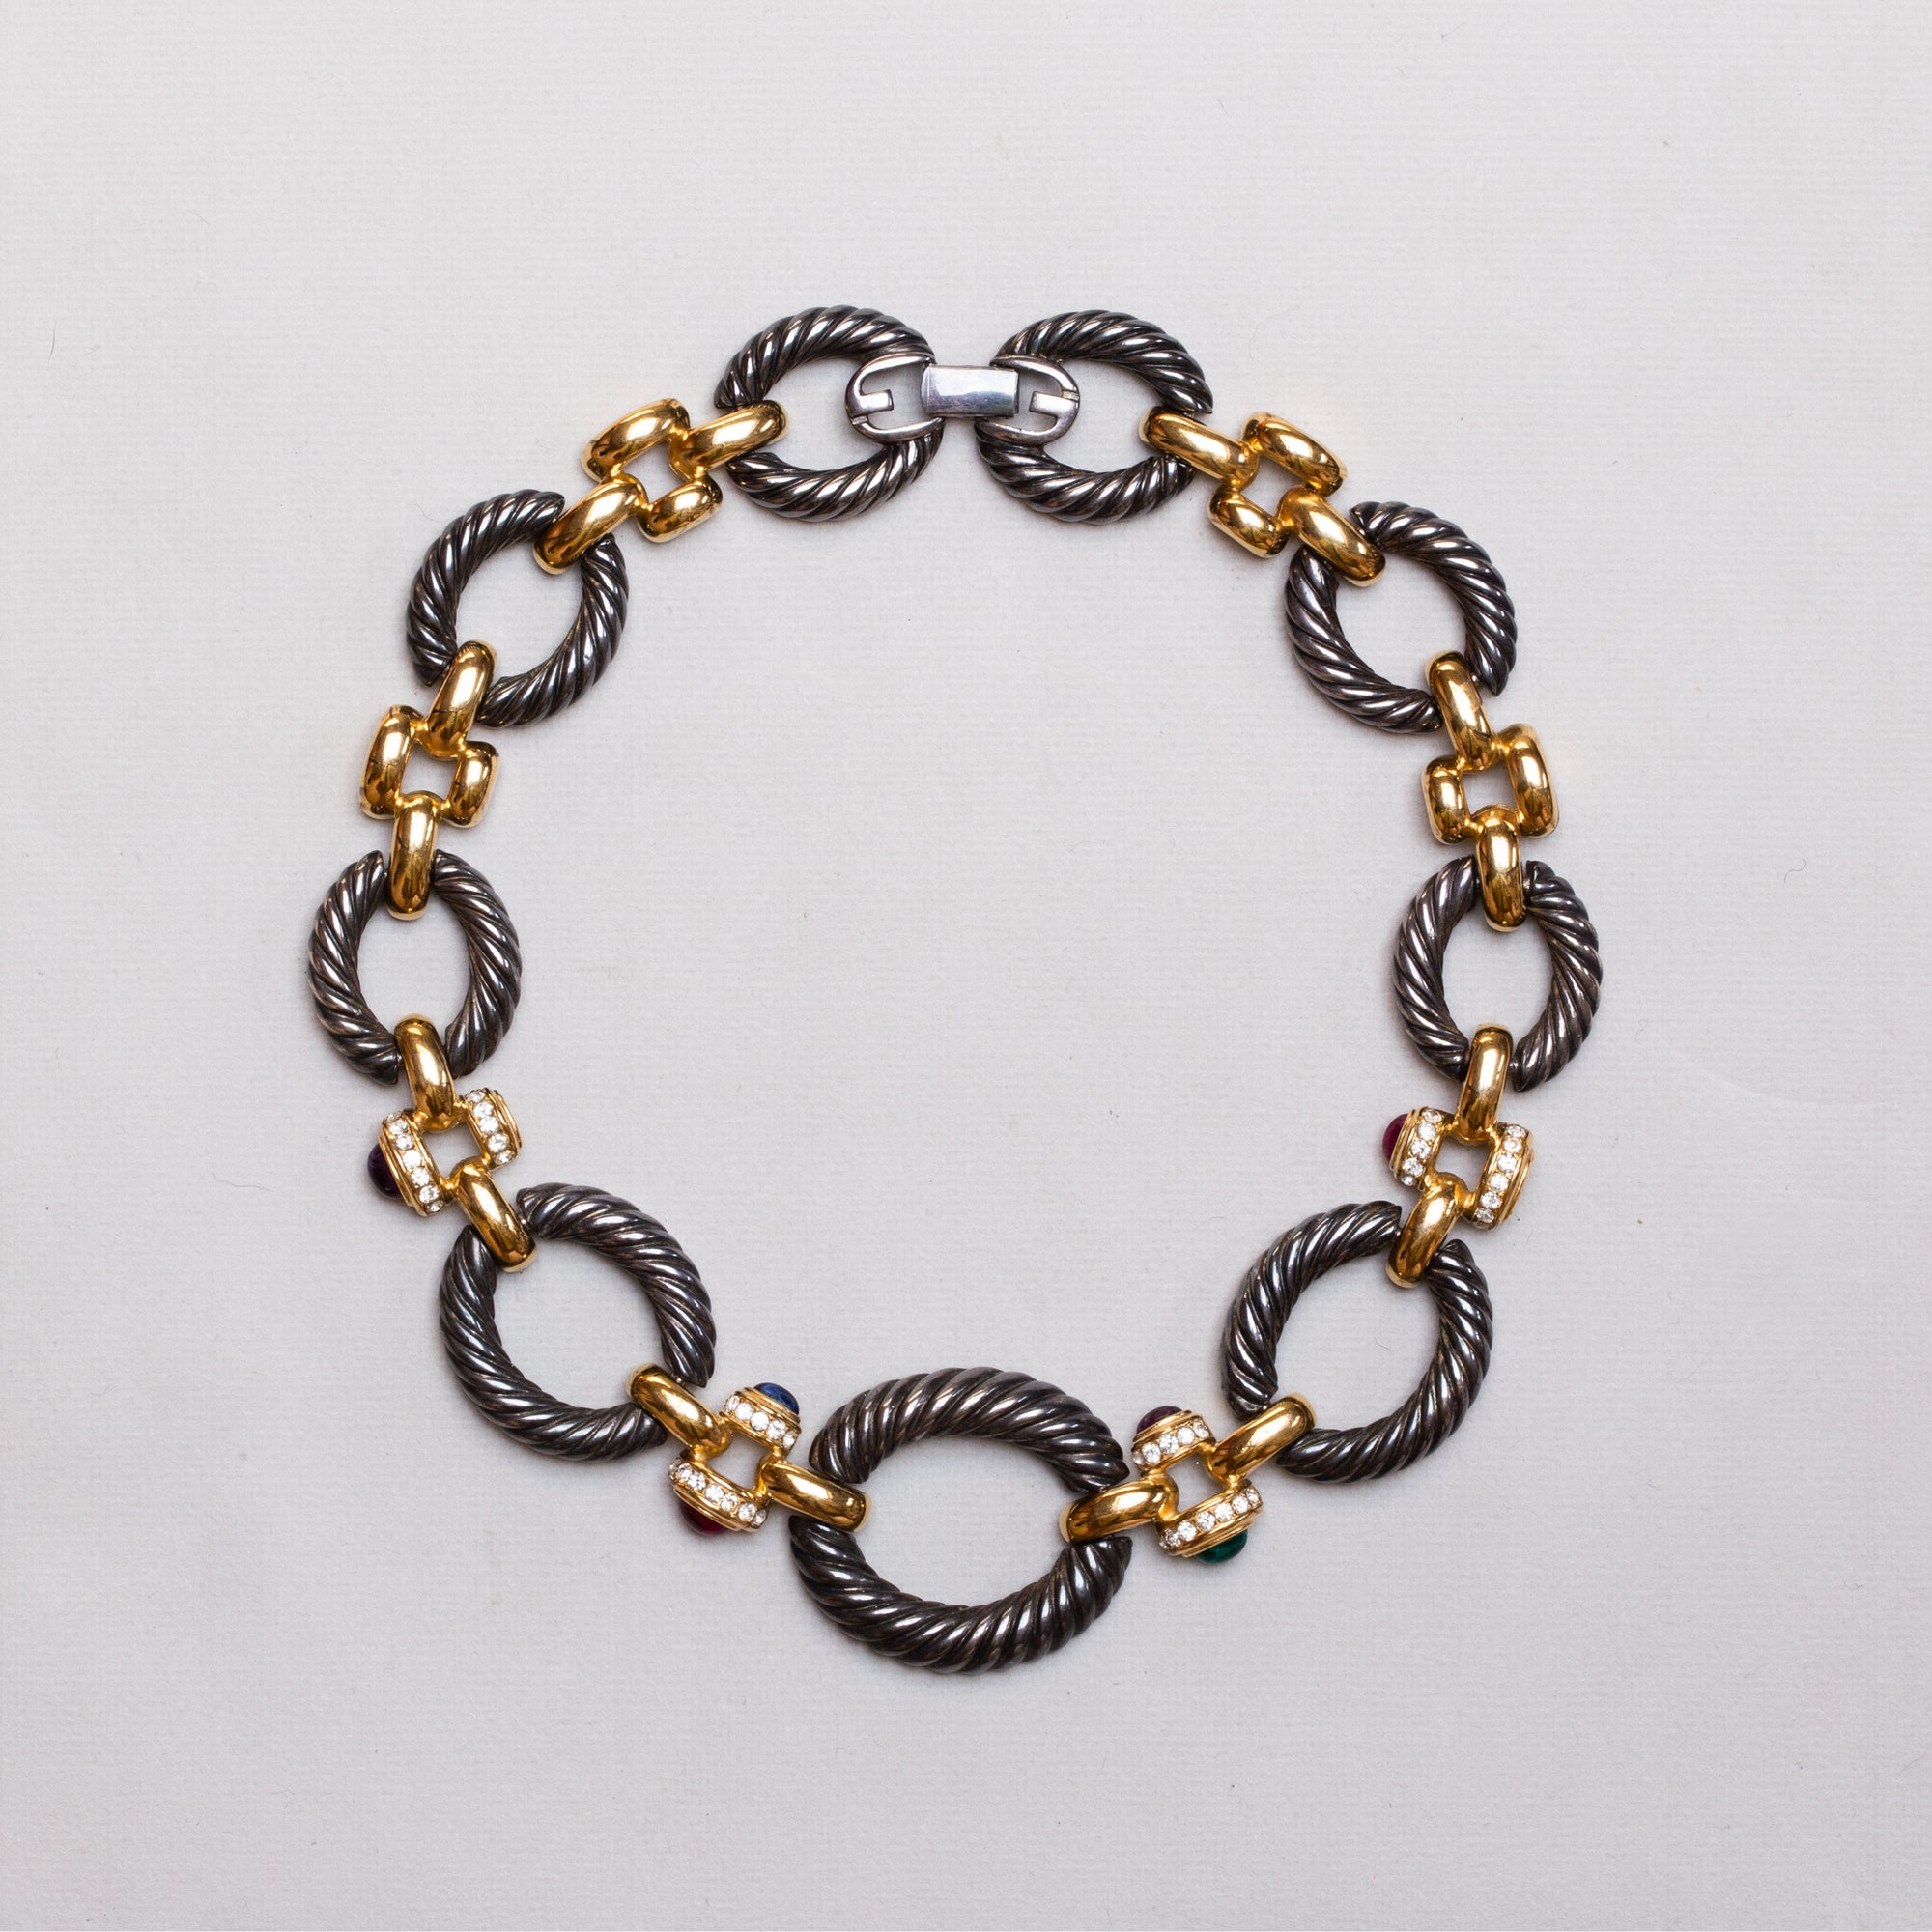 Vintage Gold and Black Chain Necklace